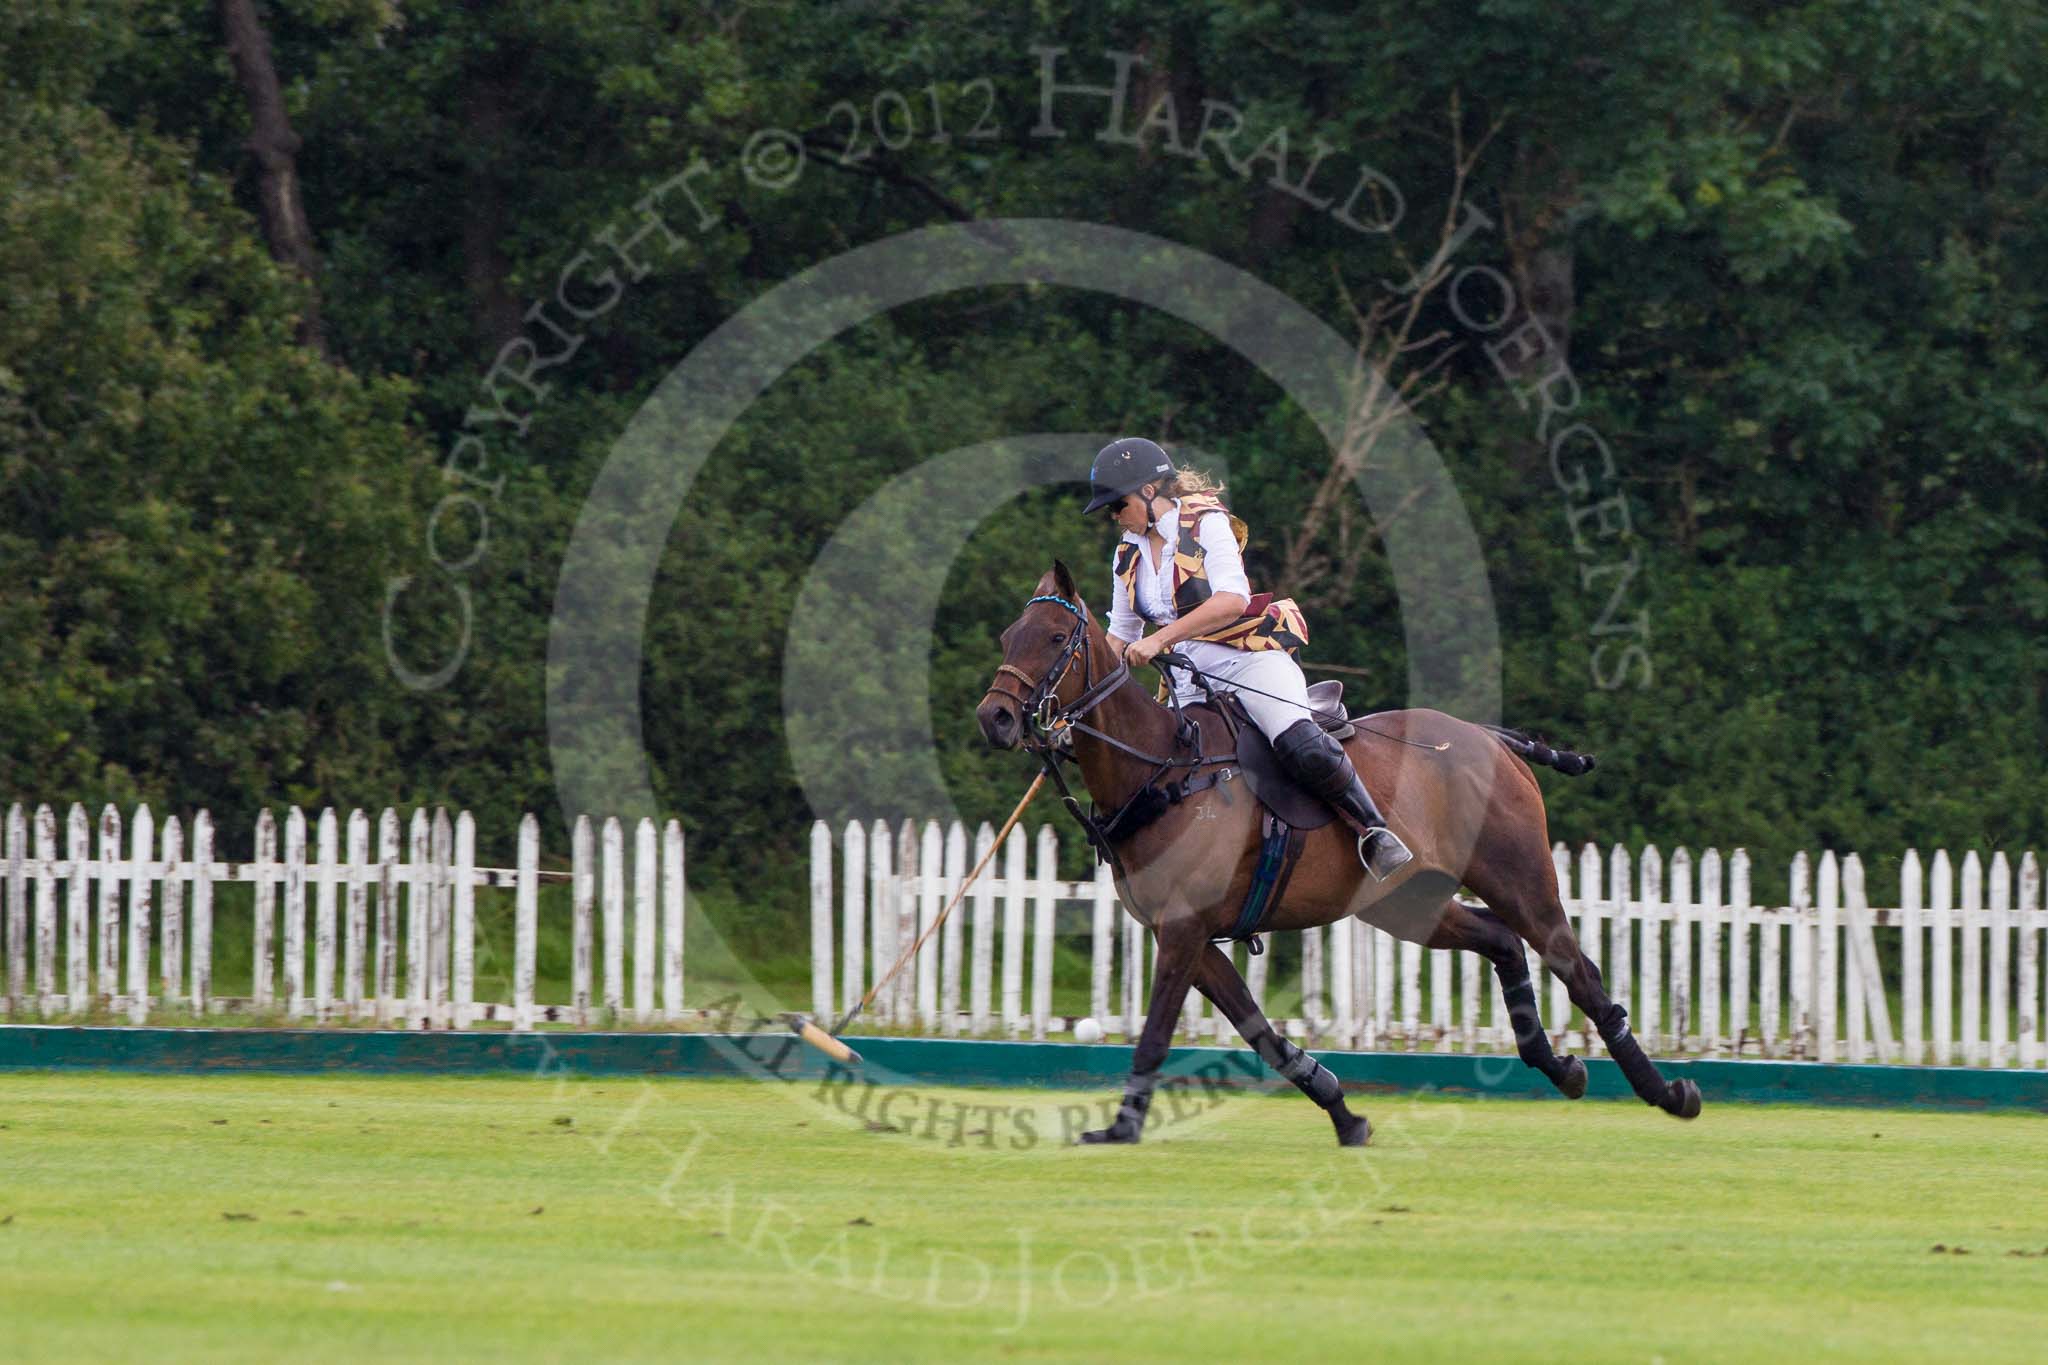 7th Heritage Polo Cup semi-finals: Rosie Ross..
Hurtwood Park Polo Club,
Ewhurst Green,
Surrey,
United Kingdom,
on 04 August 2012 at 13:10, image #98